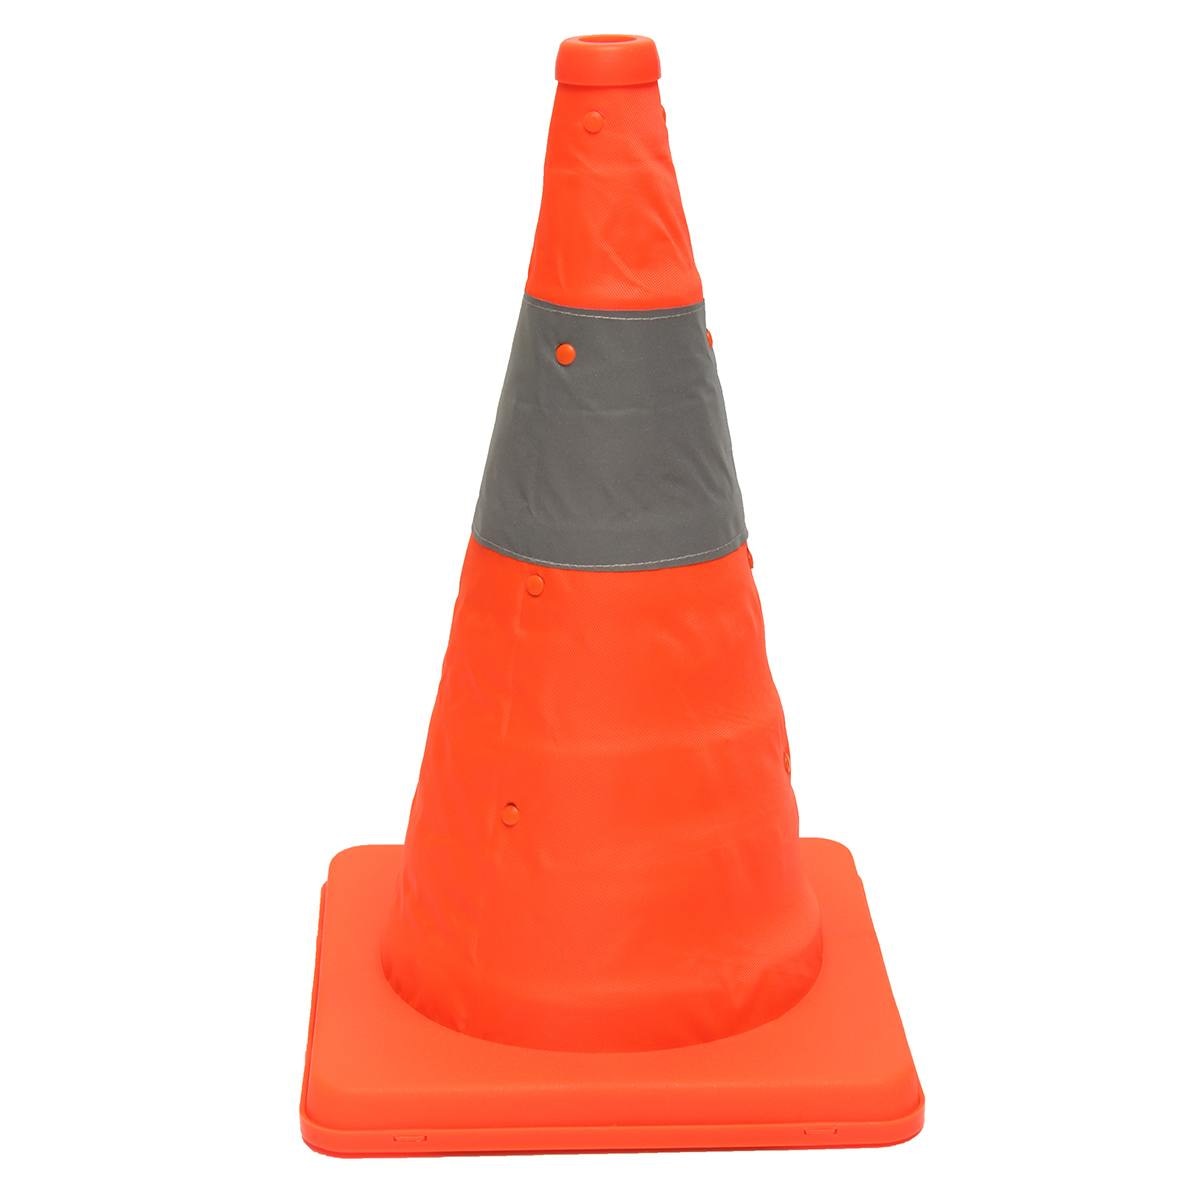 Collapsible Traffic Cone Road Safety Tool